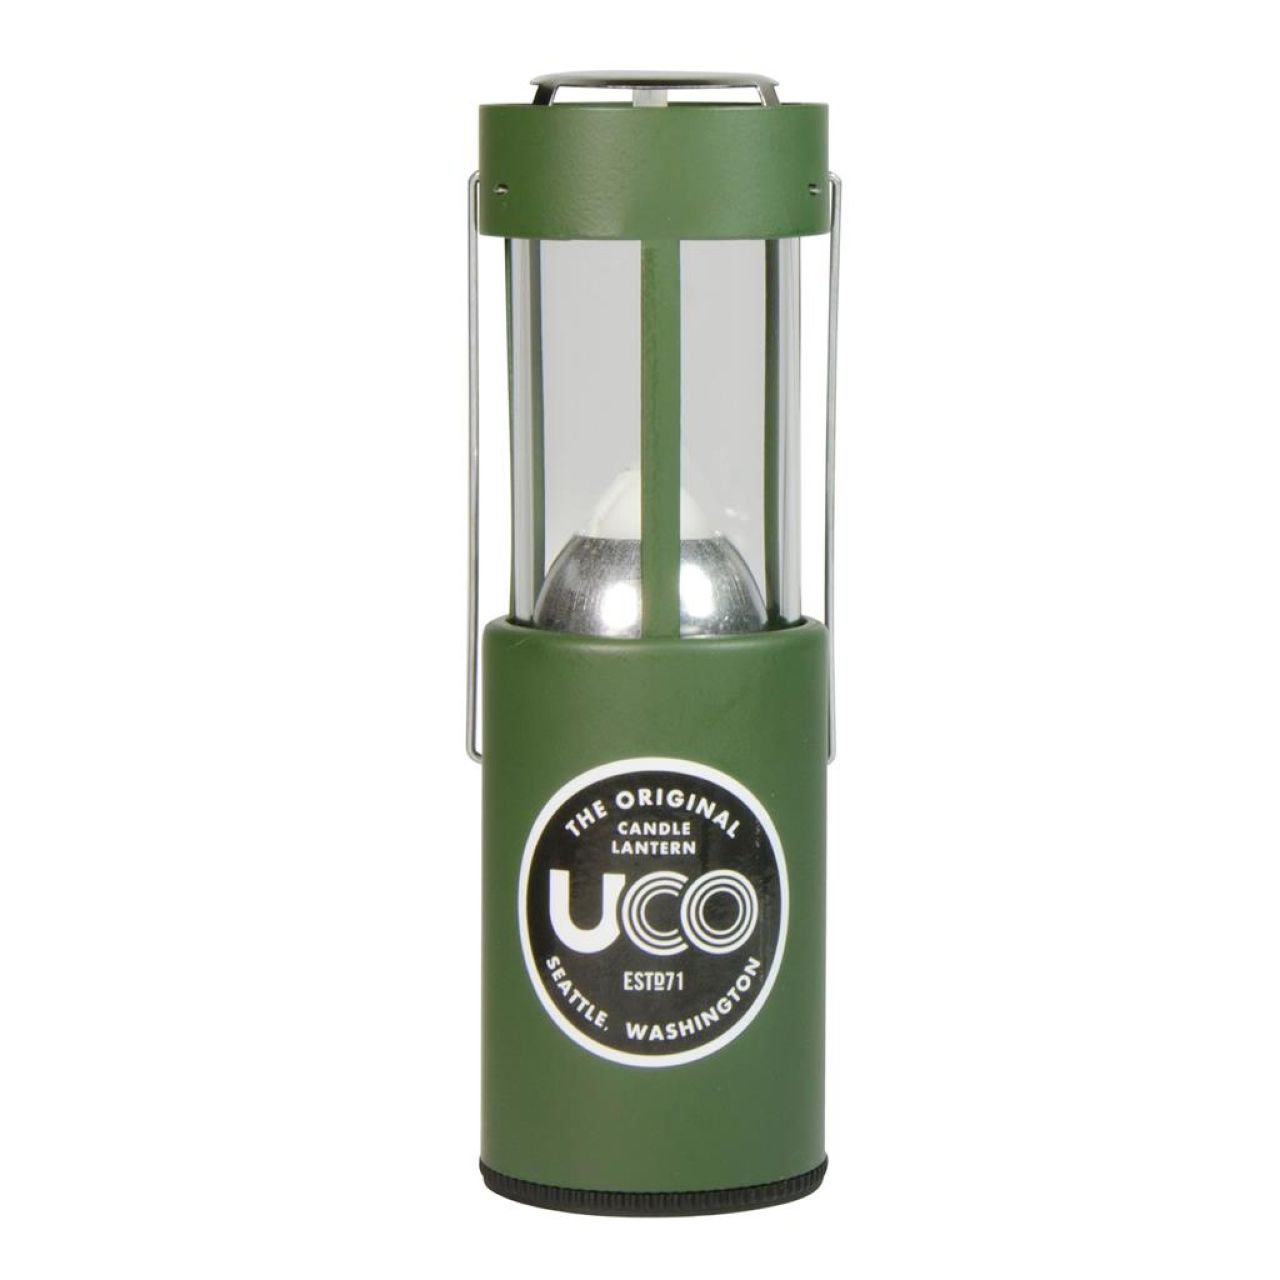 UCO candle lantern, in a freezing tent, can it change condensation